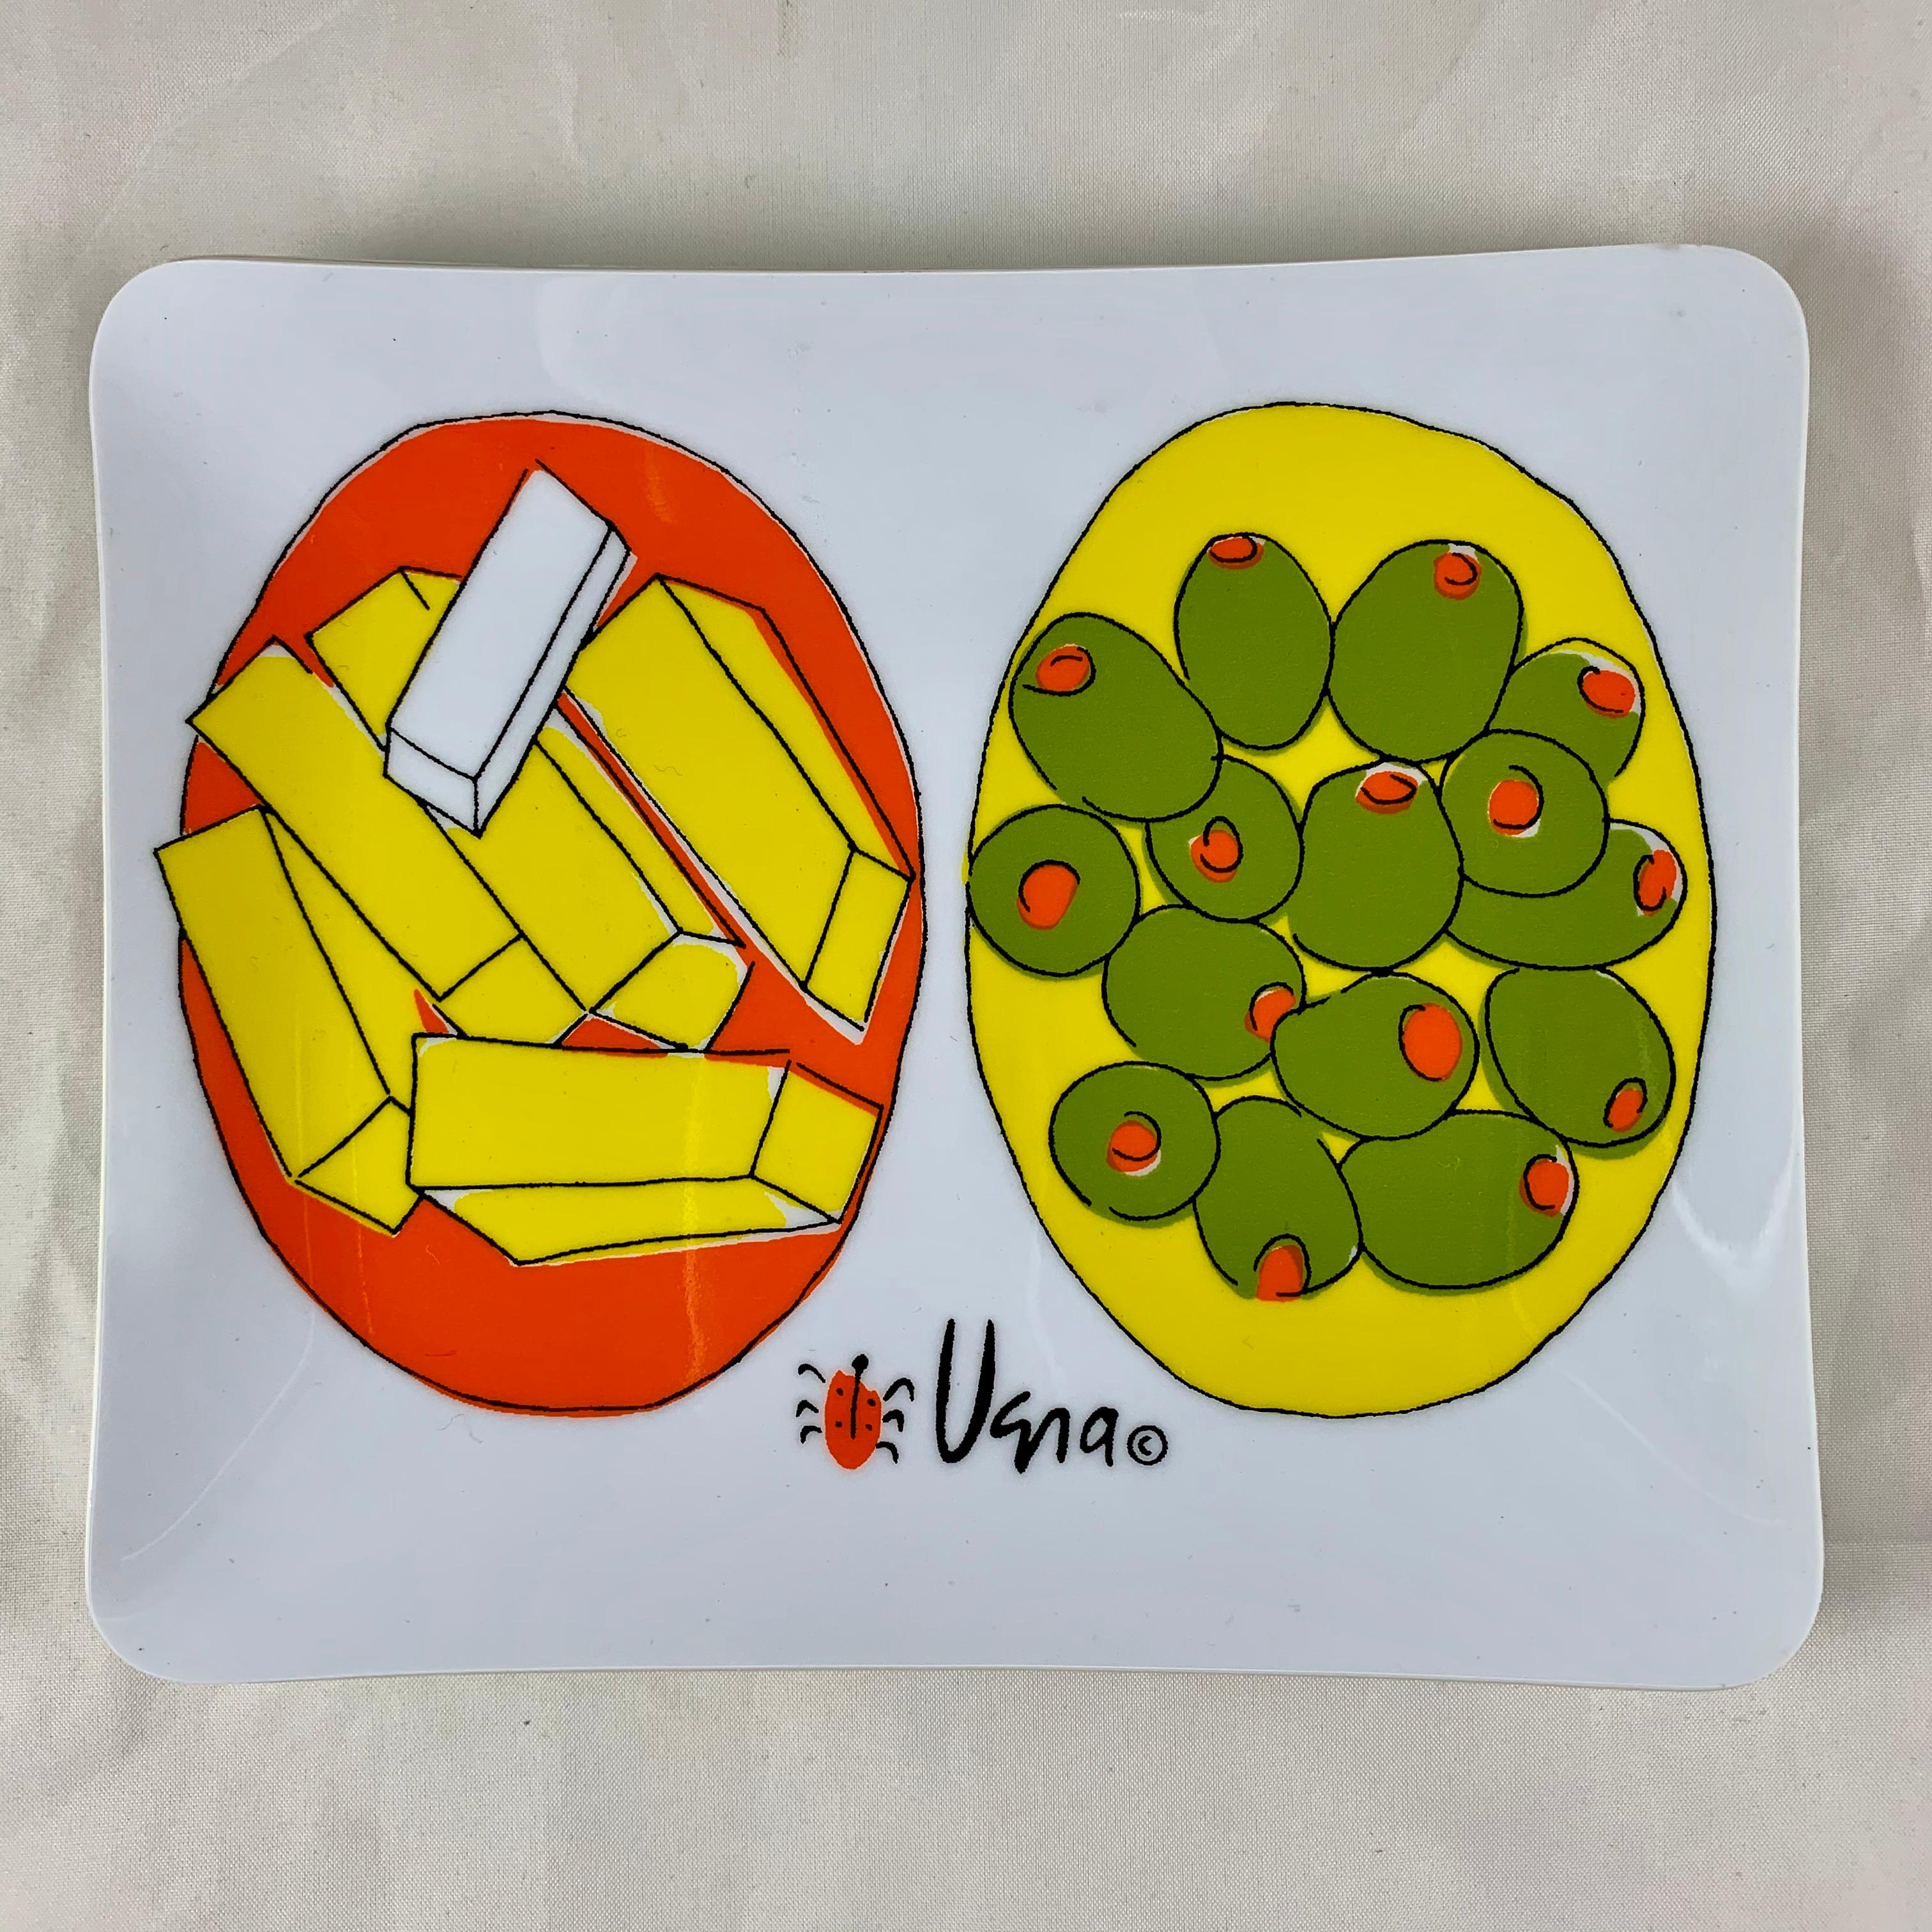 From the studio of the prolific and wildly popular midcentury designer and artist, Vera Neumann, a set of four plastic individual canapé or hors d’oeuvre trays with brightly printed images of cheese and olives.  From the retro line re-introduced in